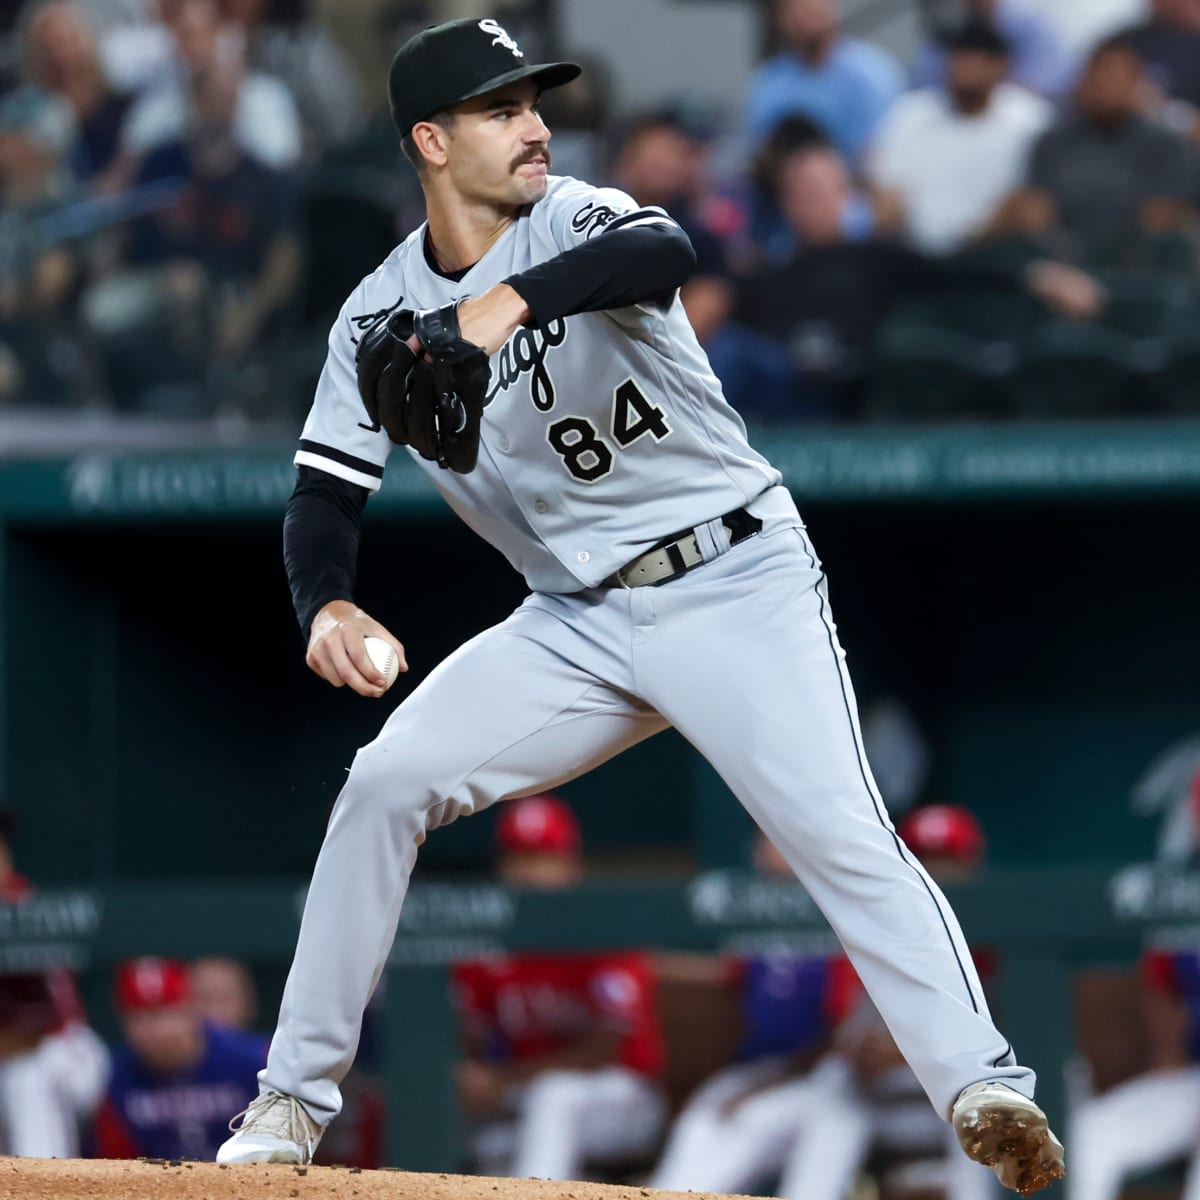 MLB - Dylan Cease had everything working.